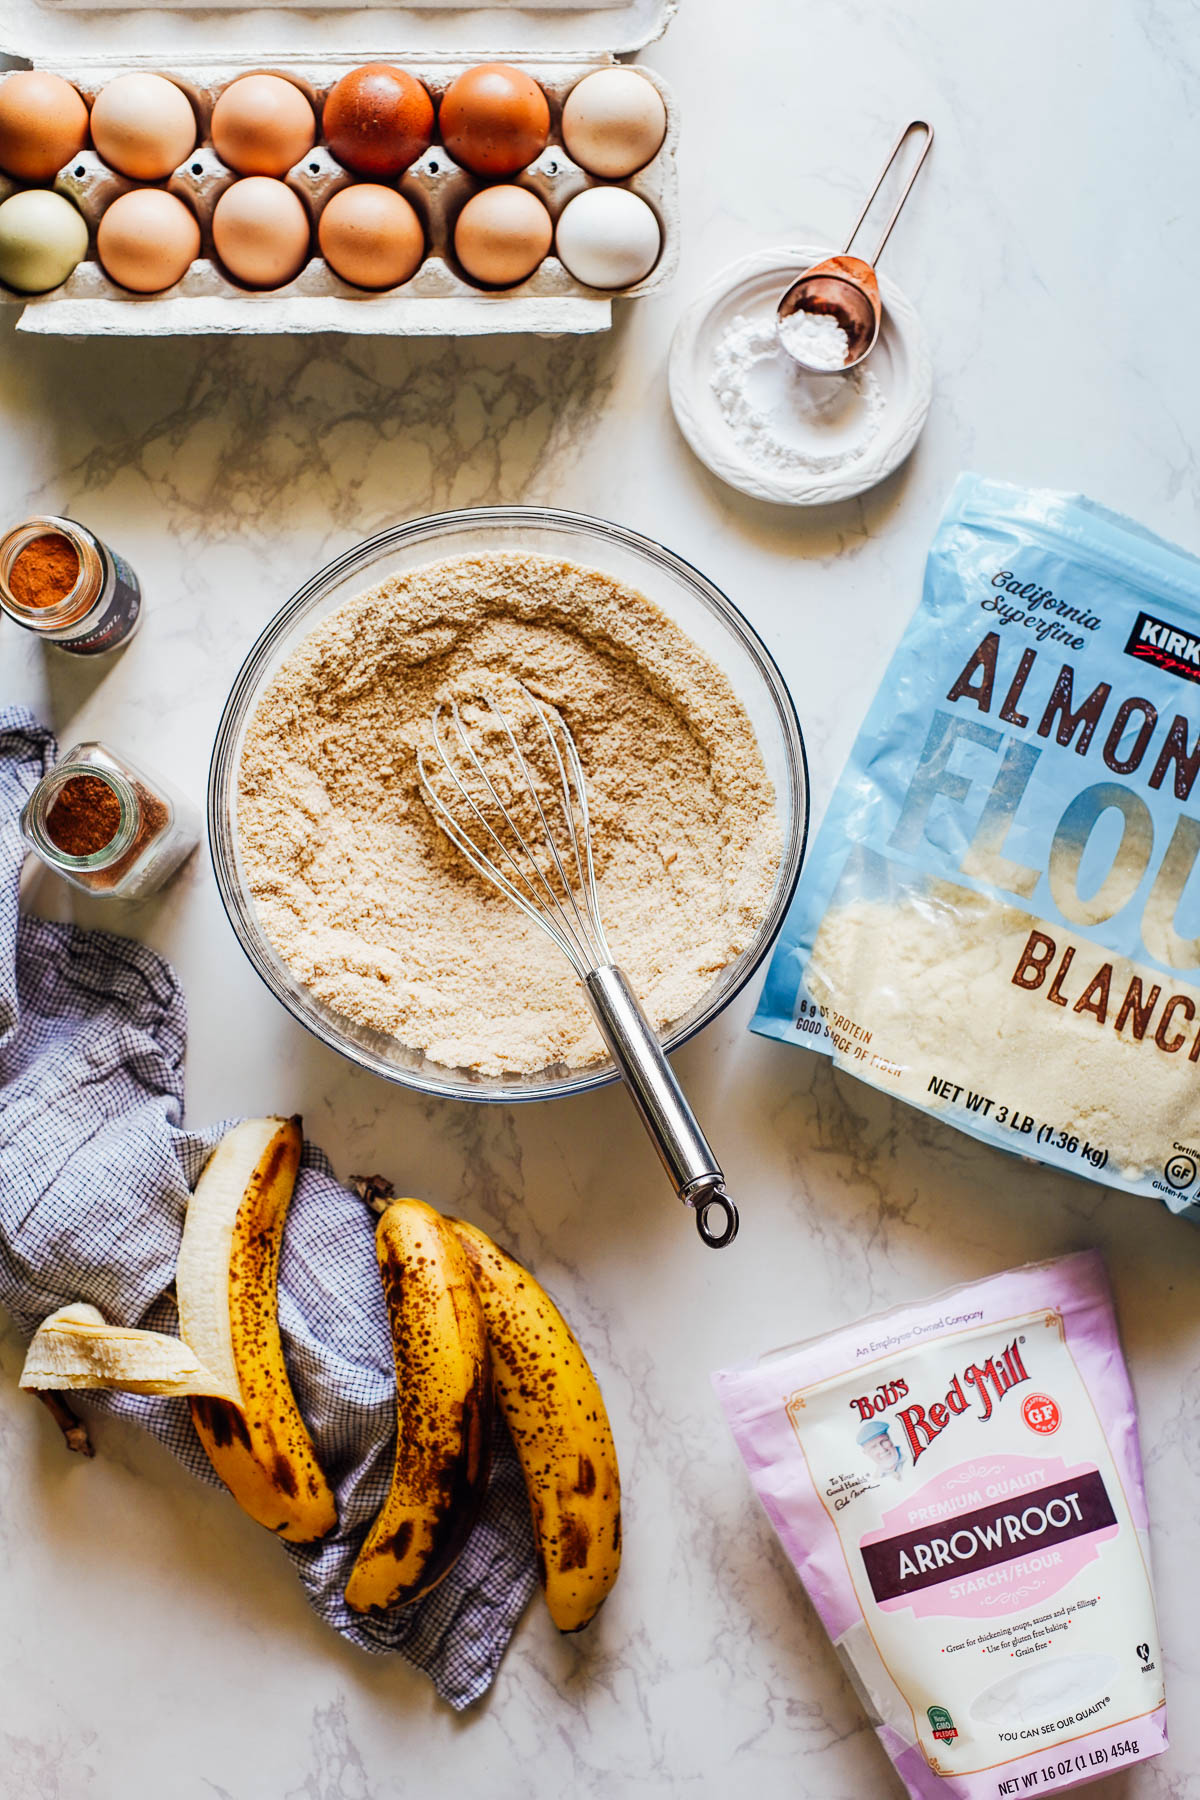 Ingredients needed to make banana muffins: almond flour, arrowroot starch, eggs, bananas.